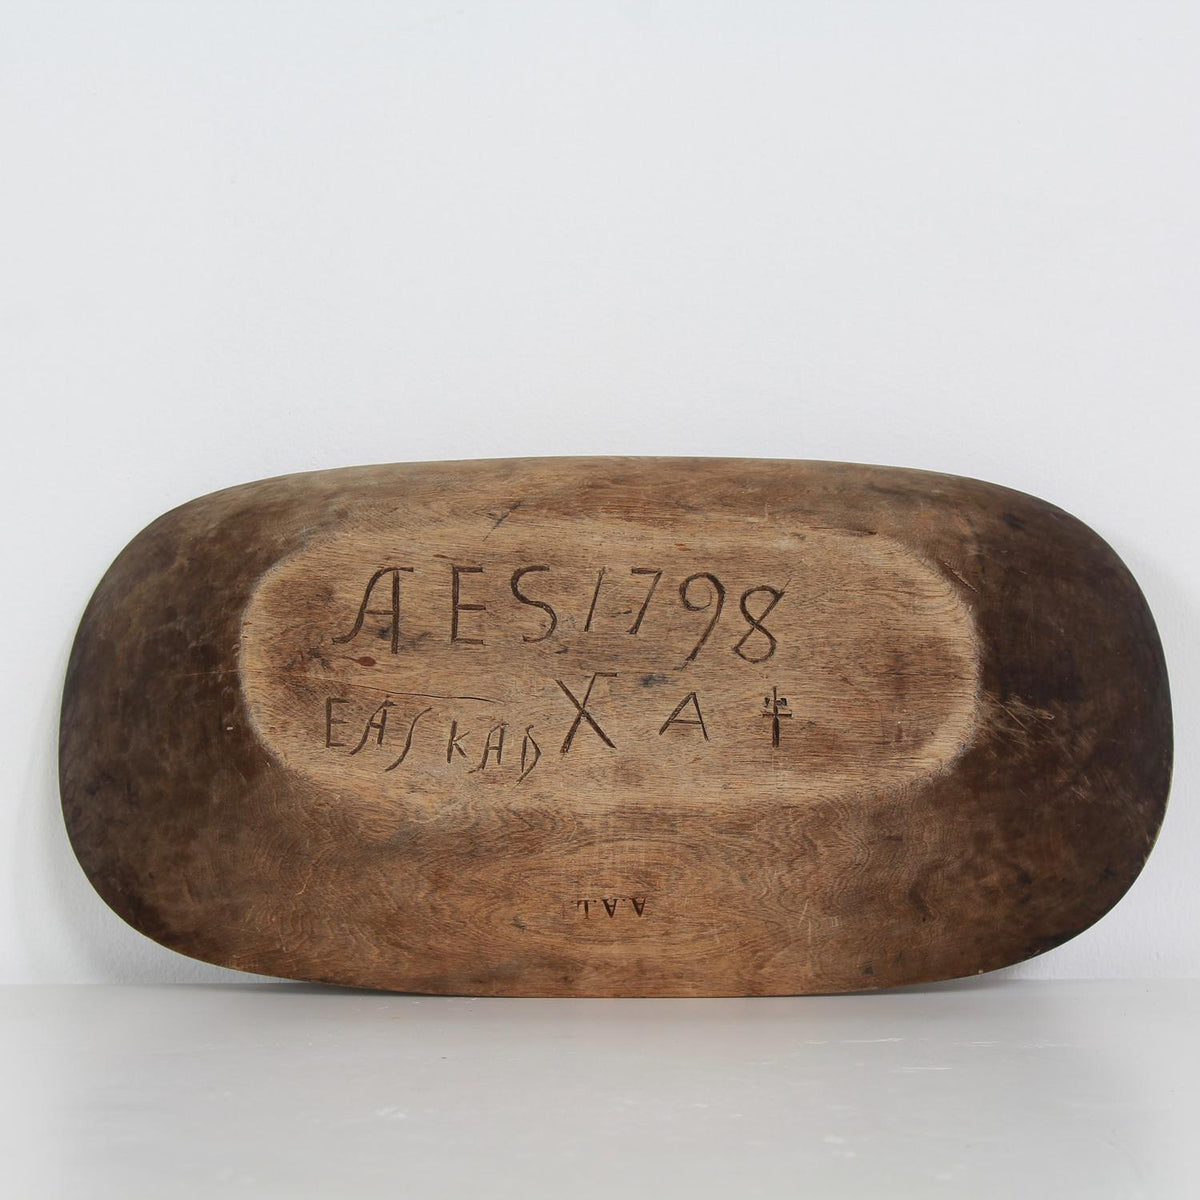 Unique 18thC  Wooden Root  Bowl from Northern Sweden Dated 1798